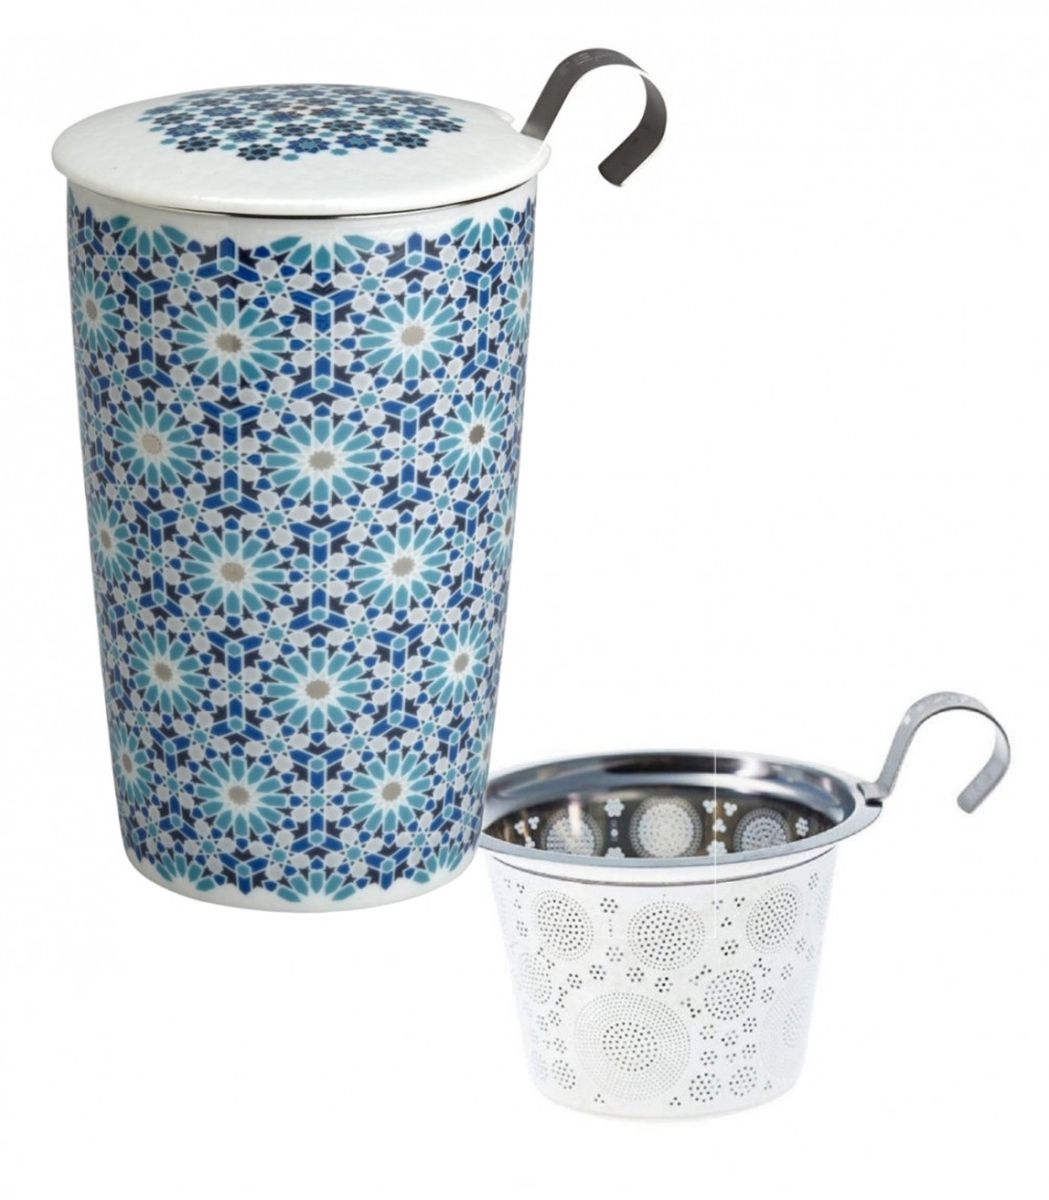 Double-walled porcelain mug with infuser - Andalusia